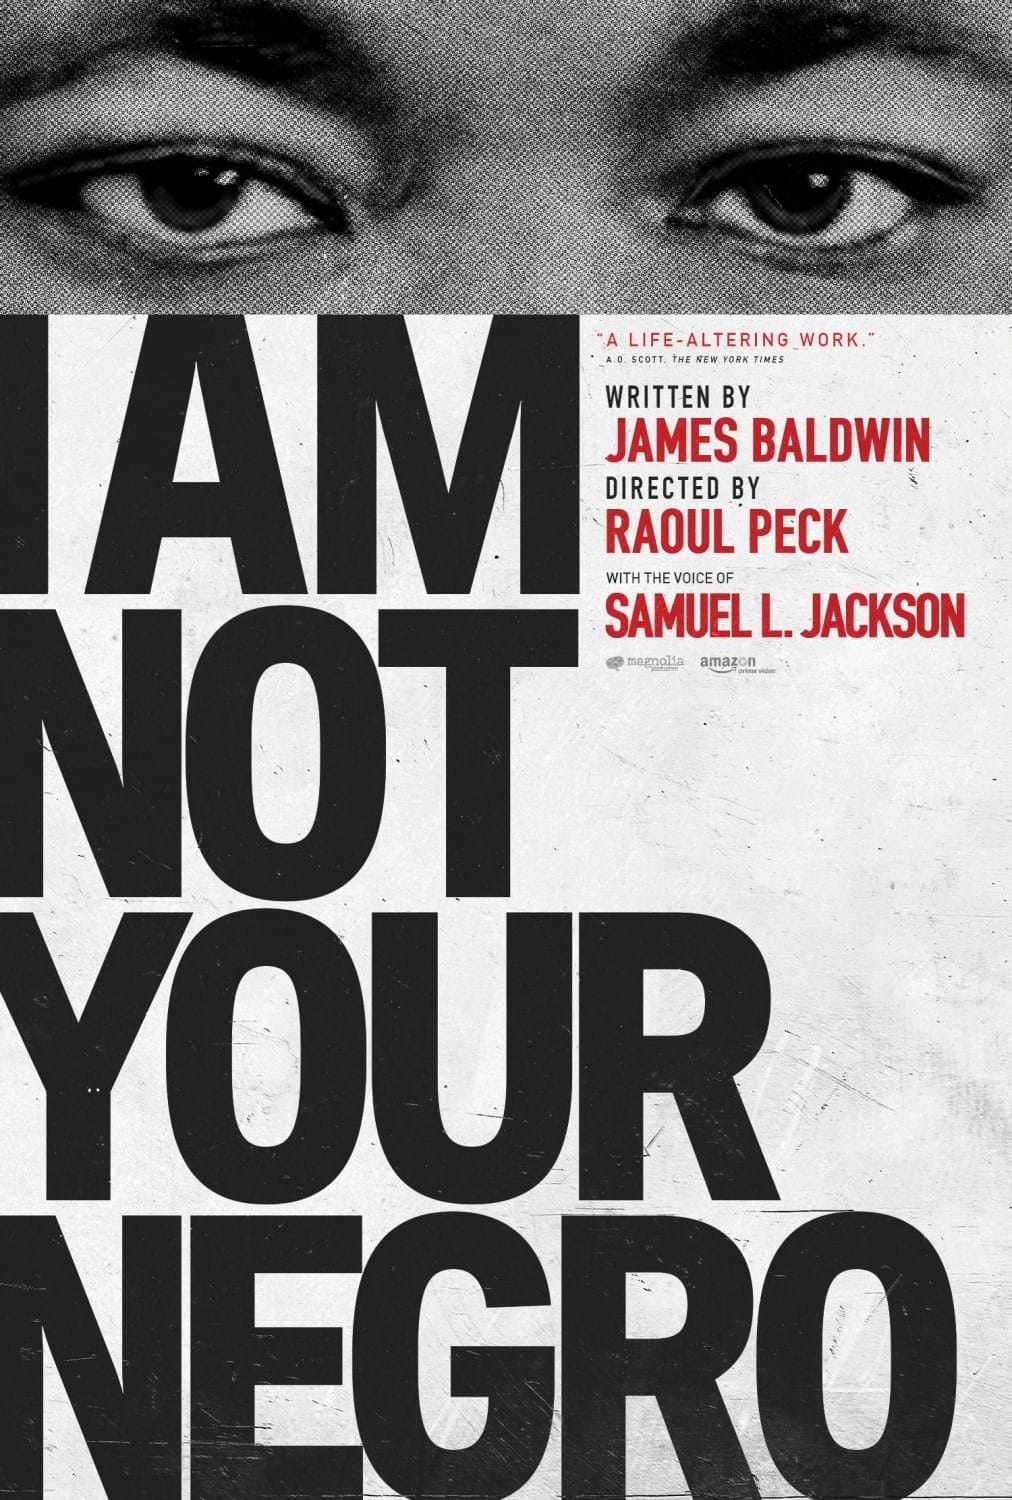 Image to promote the film, I Am Not Your Negro.